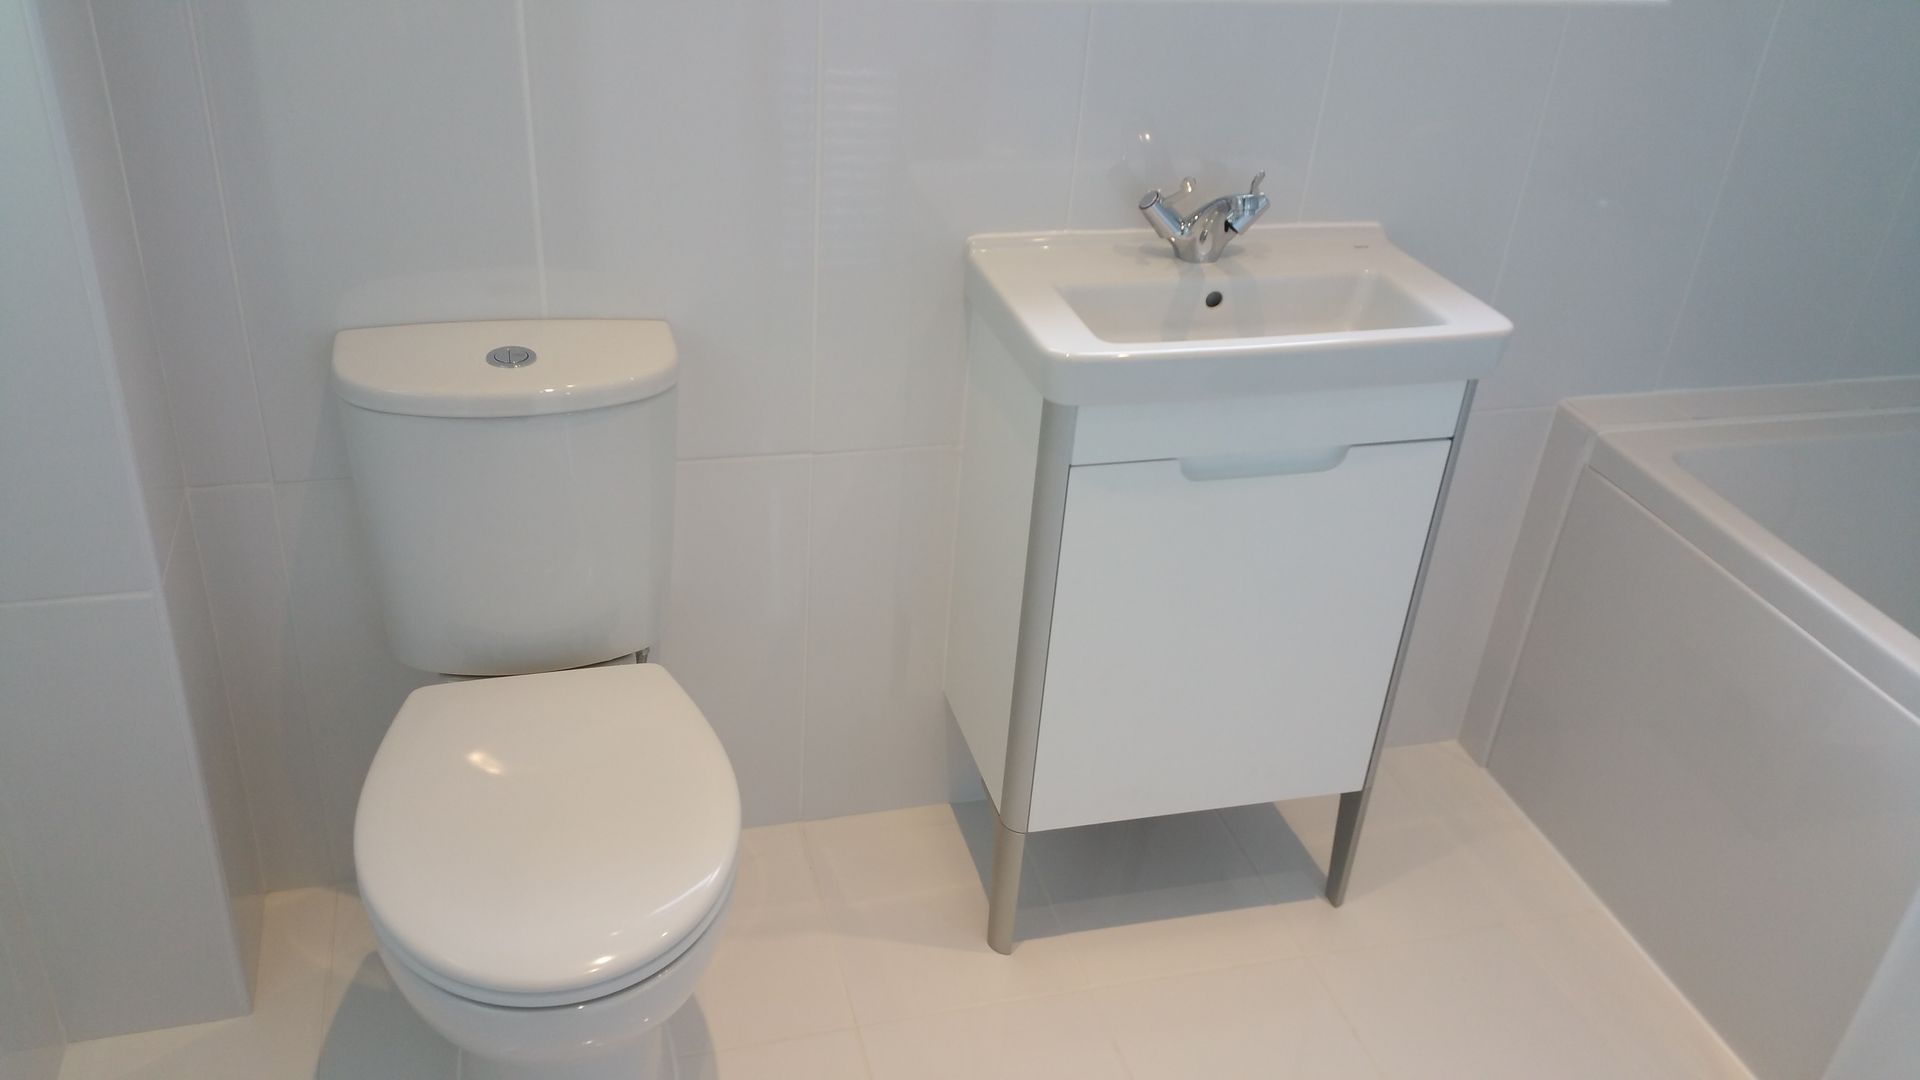 Toilet & Sink - After Replace Your Bathroom